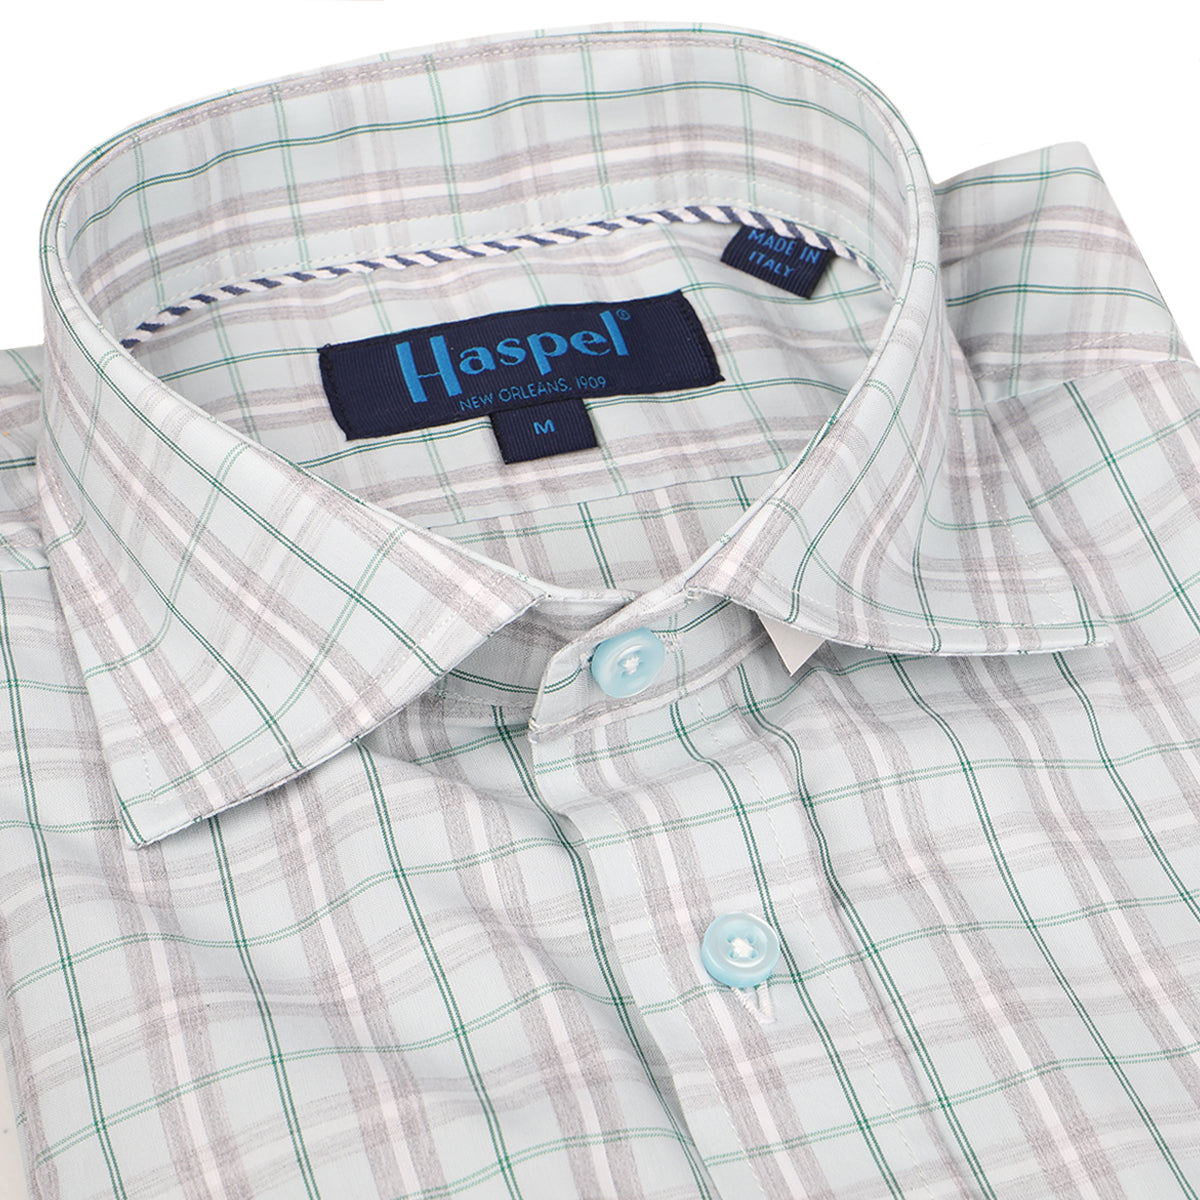 Fresh & minty, plaid and ready. Casual and classic.   100% Cotton  •  Long Sleeve  •  Spread Collar  •  Chest Pocket  •  Button Cuff  •  Machine Washable  •  Made in Italy Return Policy